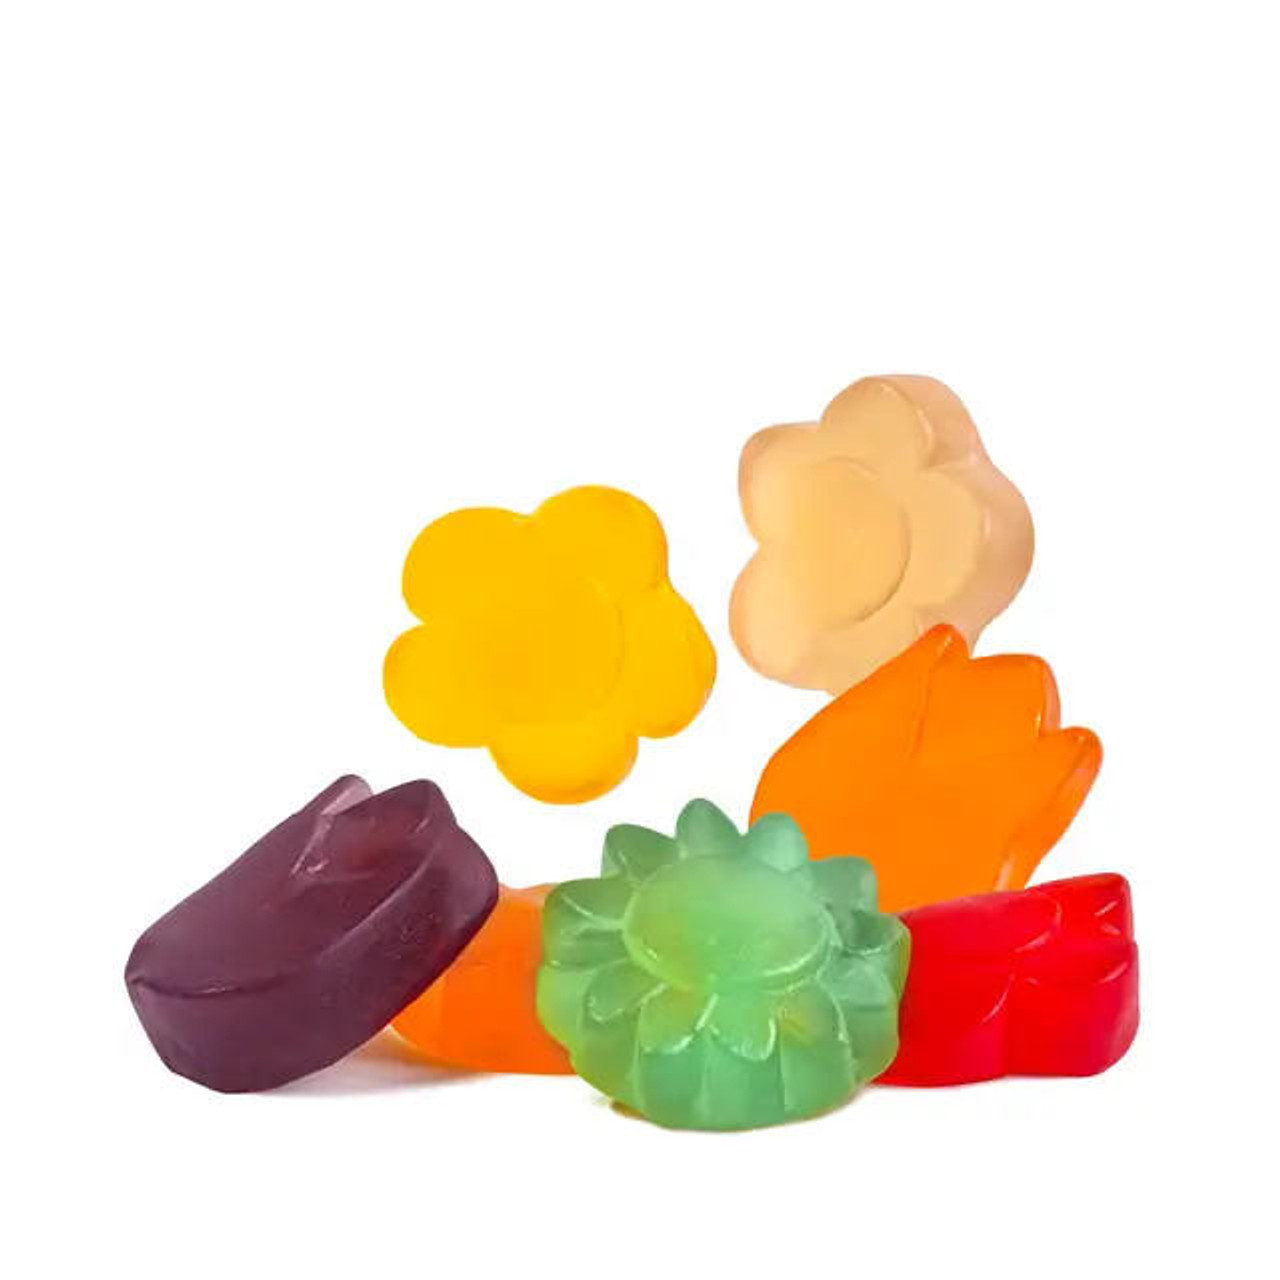  Albanese Gummi Awesome Blossoms 5 lb. - 4/Case | Vibrant Assorted Flower Shapes 